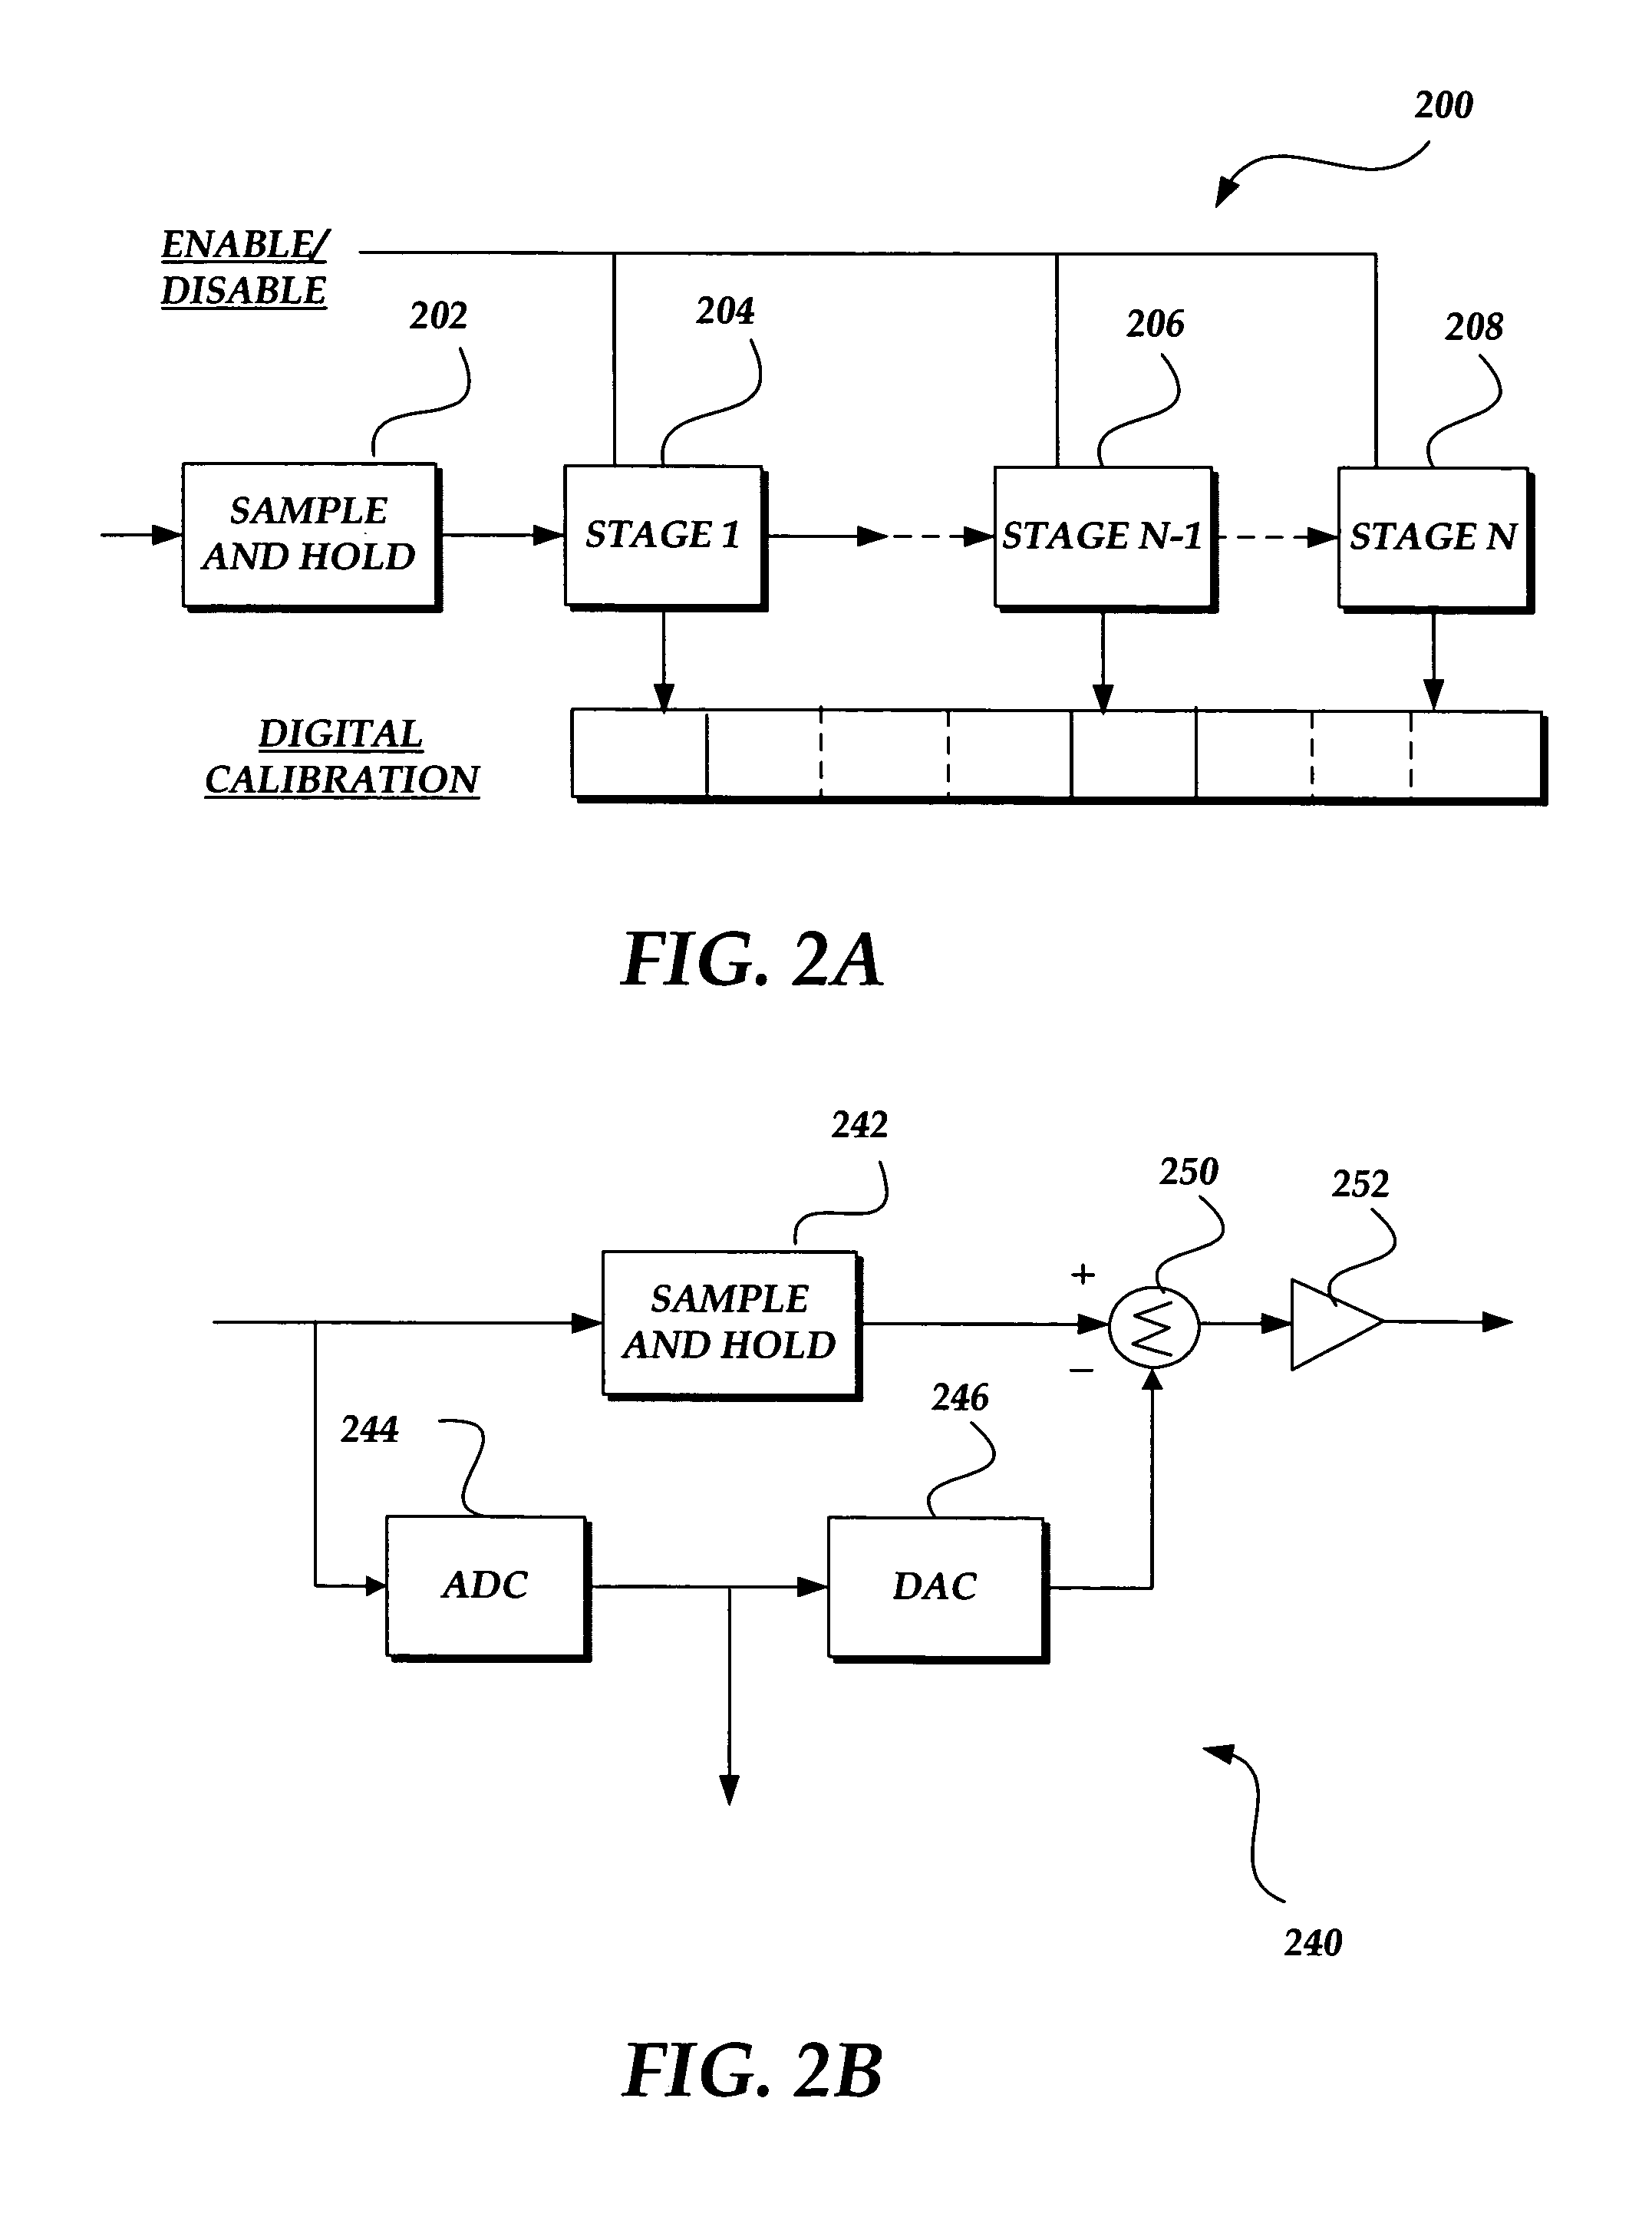 Pipelined analog to digital converter that is configurable based on wireless communication protocol